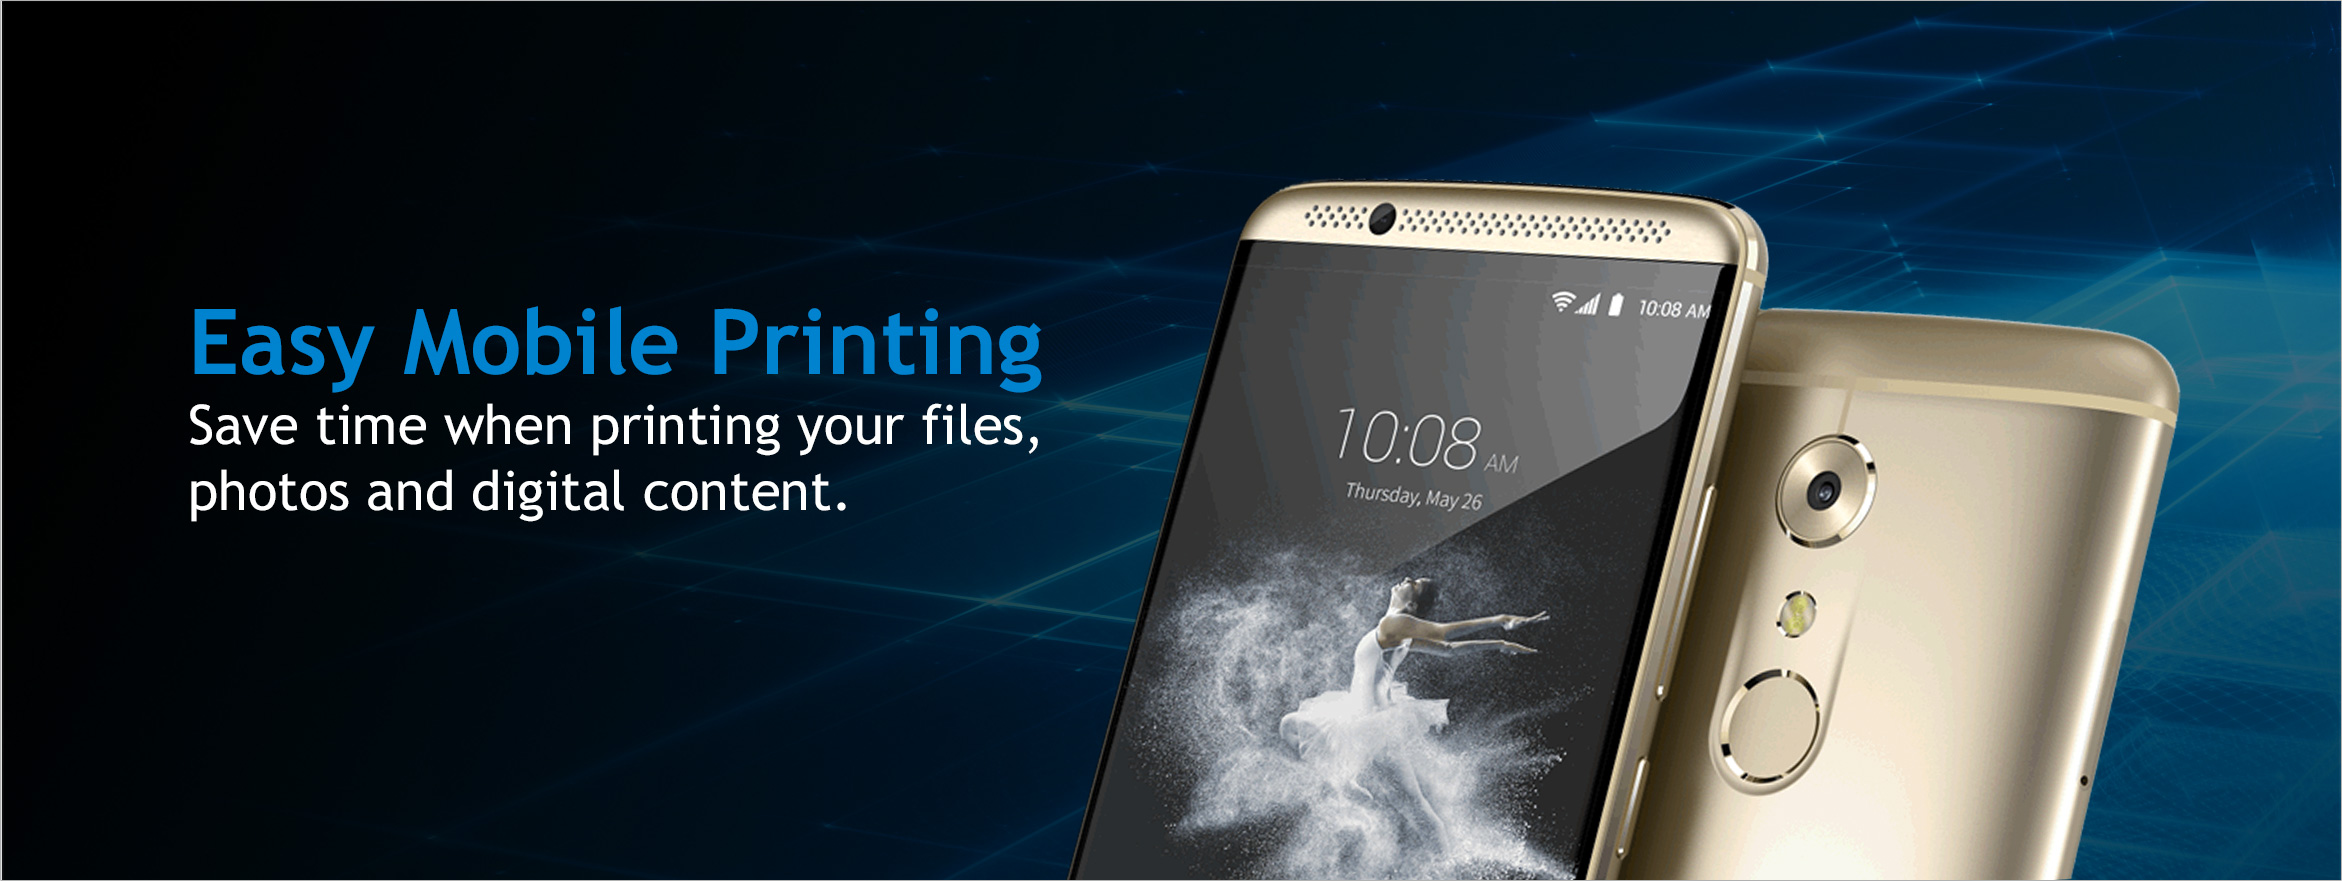 Your ZTE phone can print to Mopria certified printers.